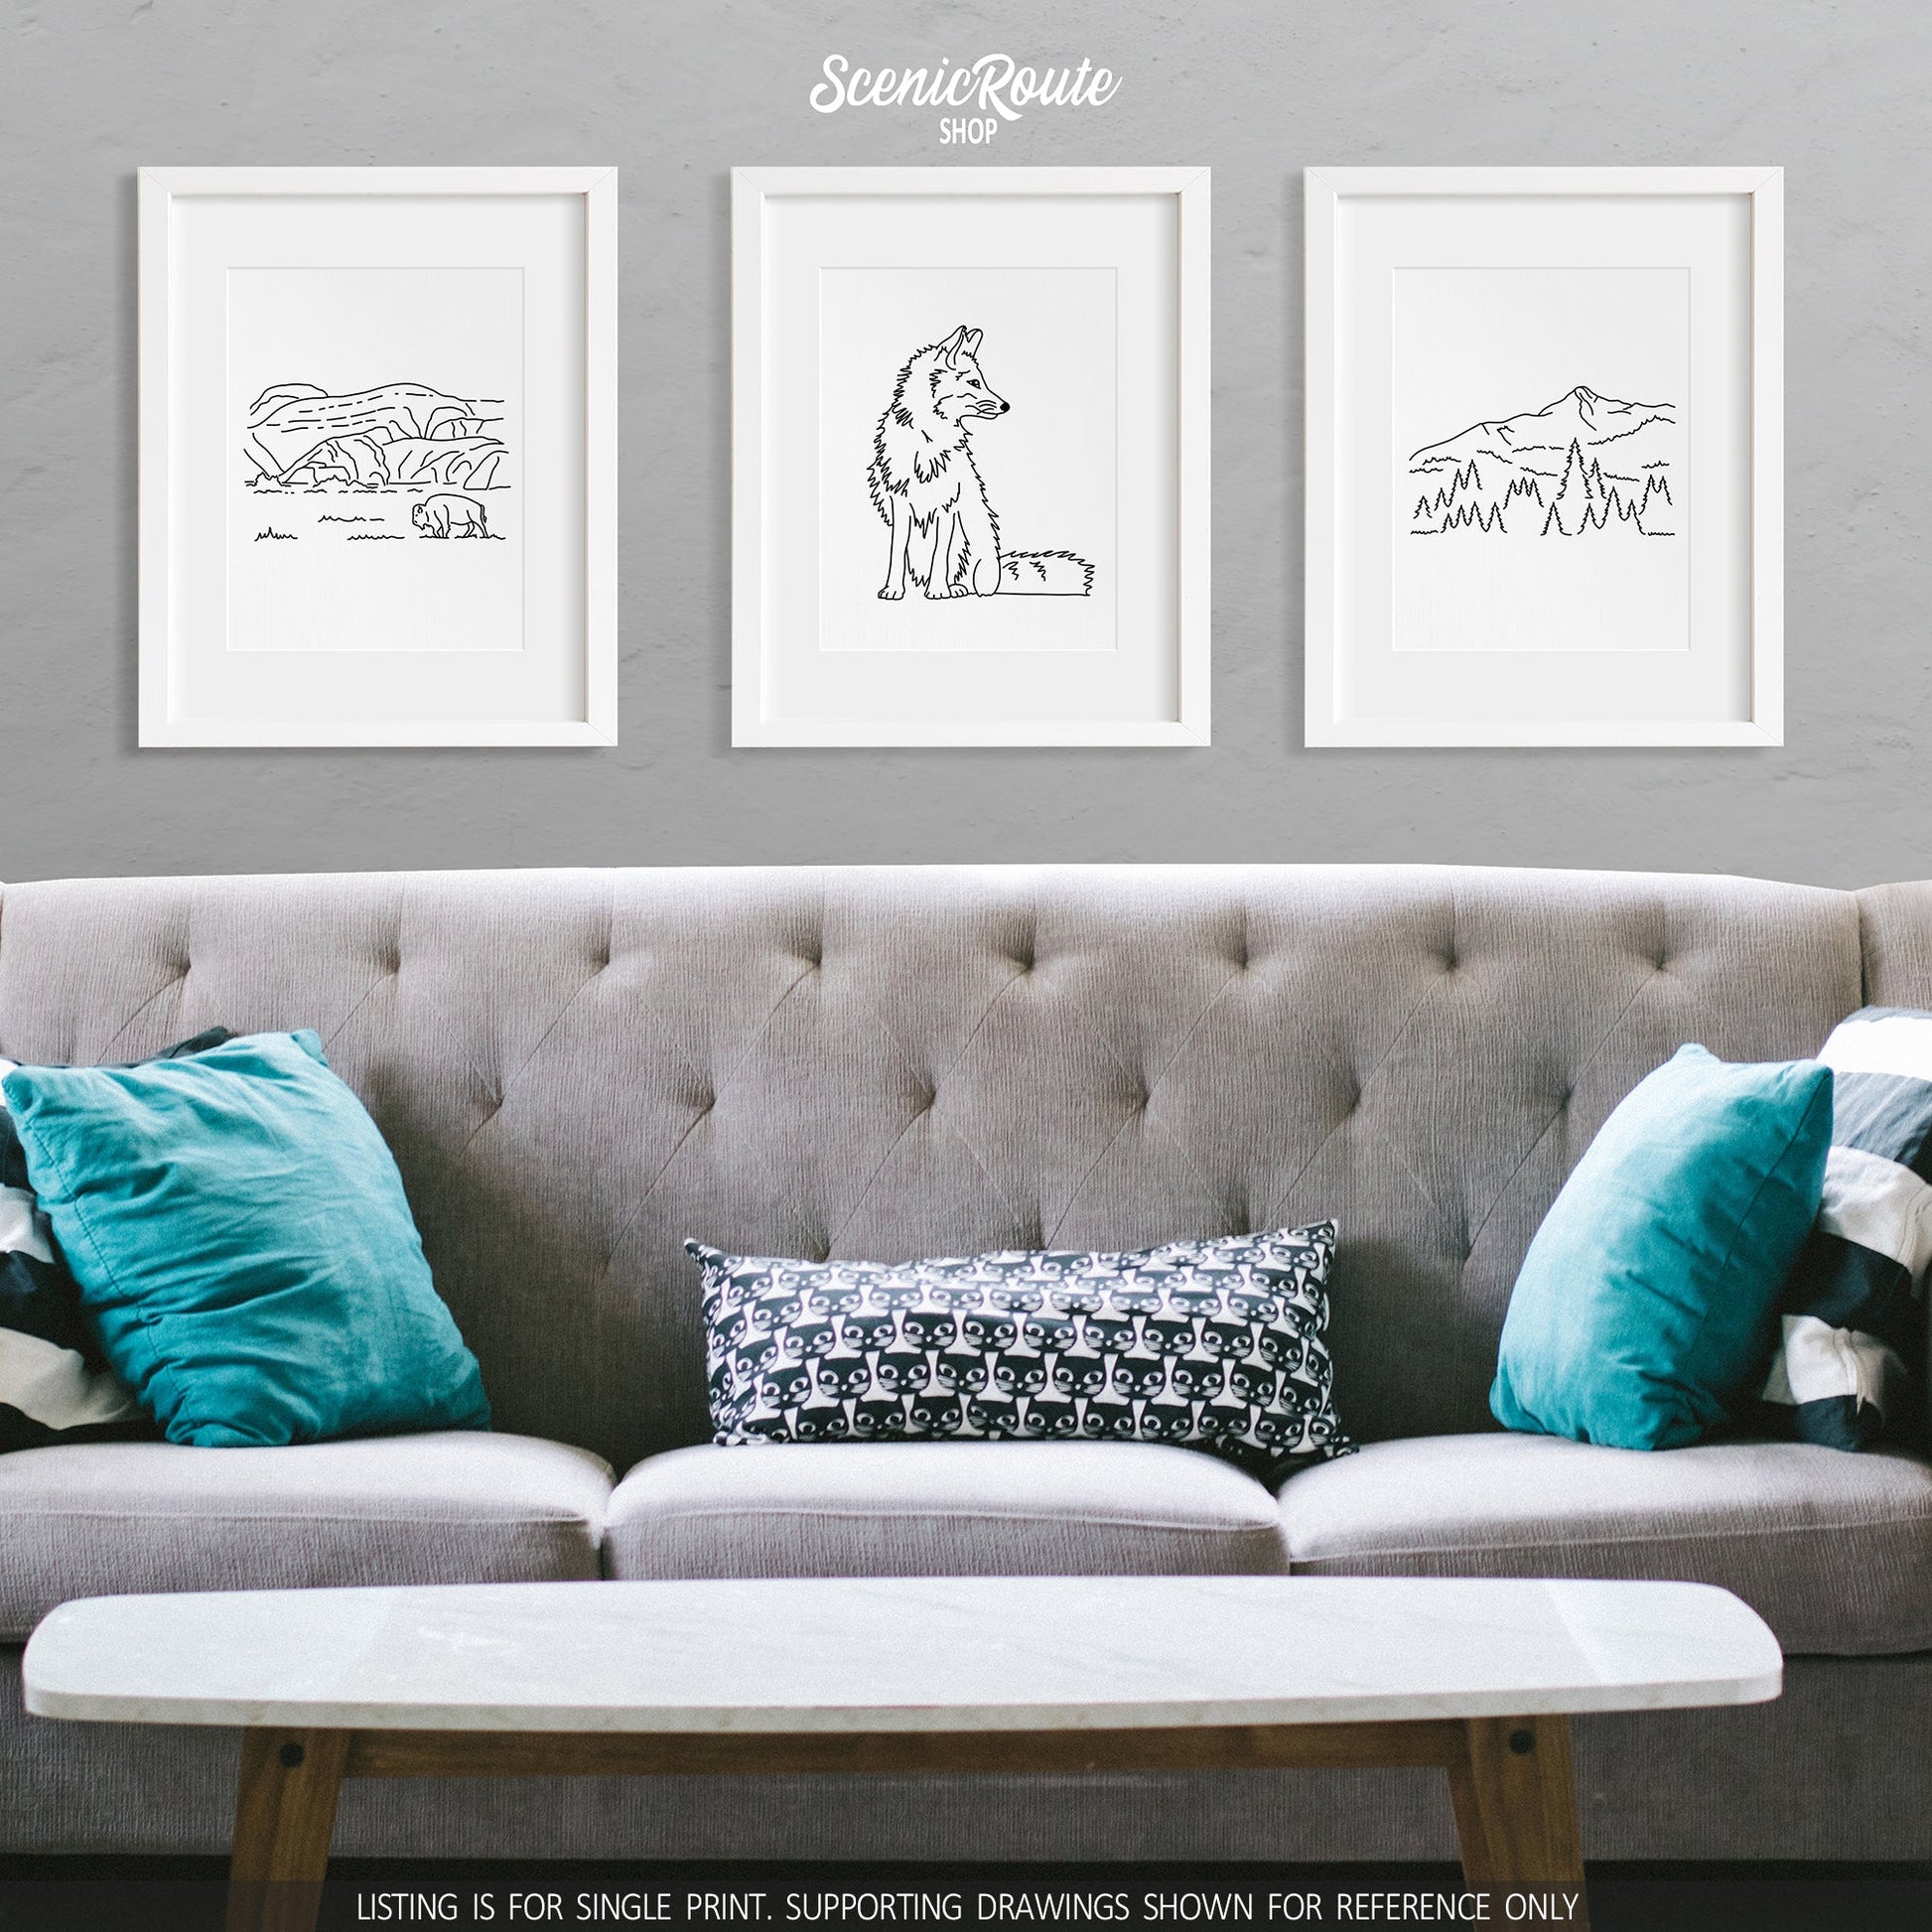 A group of three framed drawings on a wall above a couch. The line art drawings include Theodore Roosevelt National Park, a Fox, and Big Sky Montana